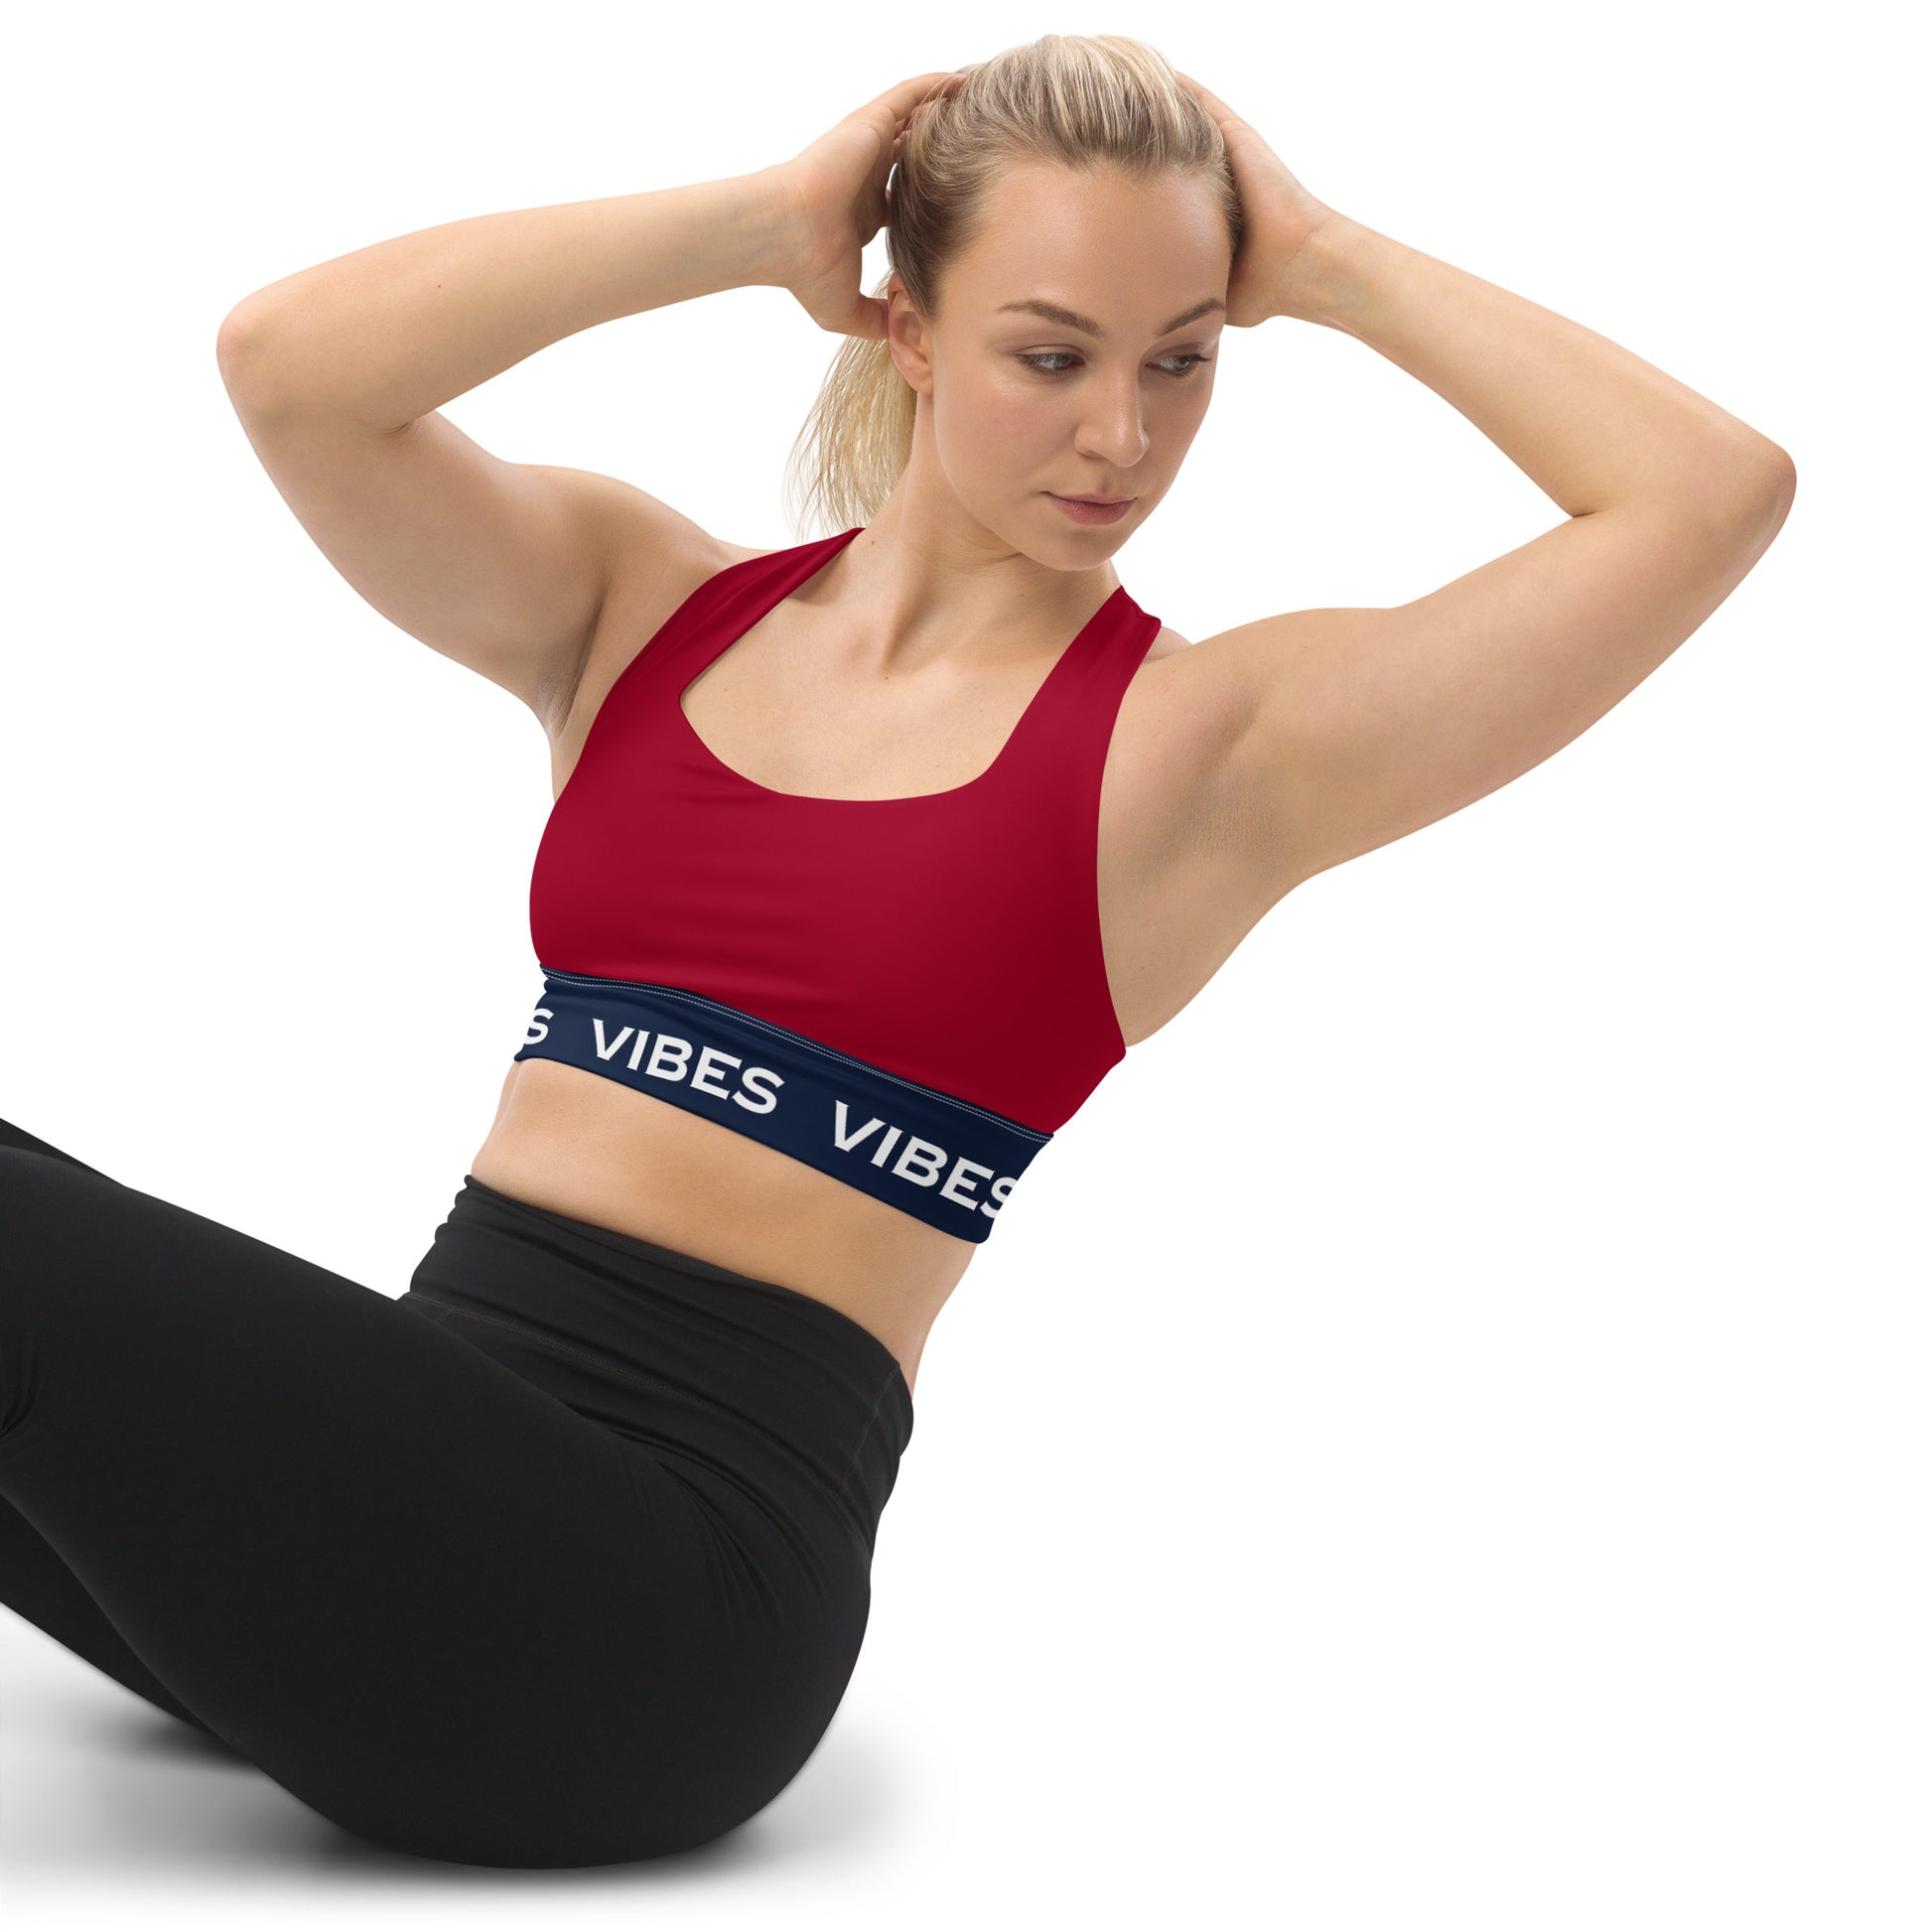 TIME OF VIBES - Longline sports bra (Red/Blue) - €49.00